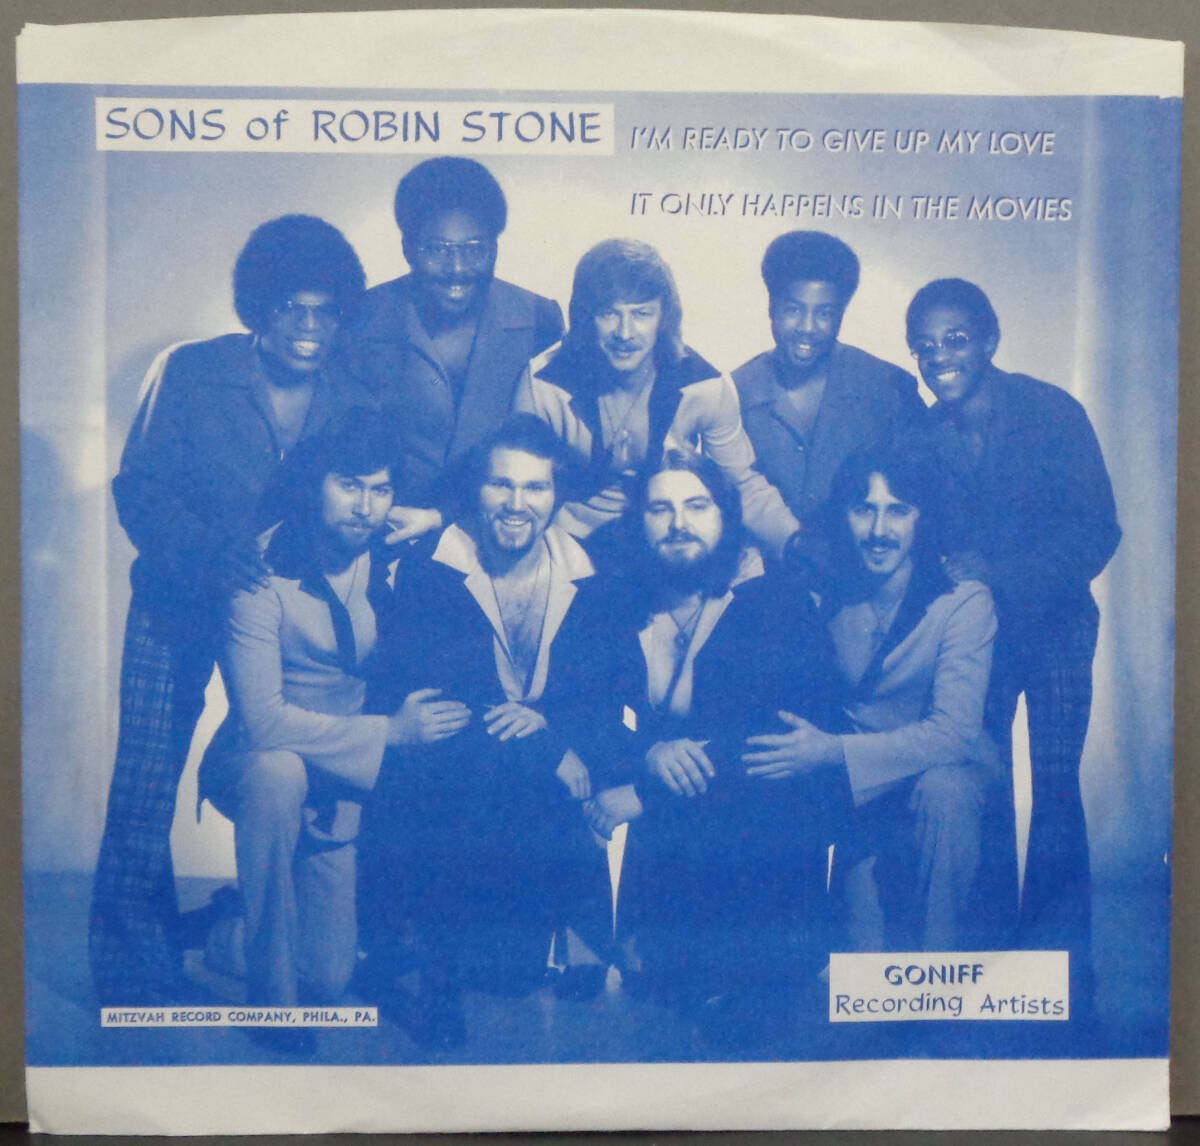 【SOUL 45】SONS OF ROBIN STONE - I'M READY TO GIVE UP MY LOVE / IT ONLY HAPPENS IN THE MOVIES (s240428050) *未発表曲_画像1